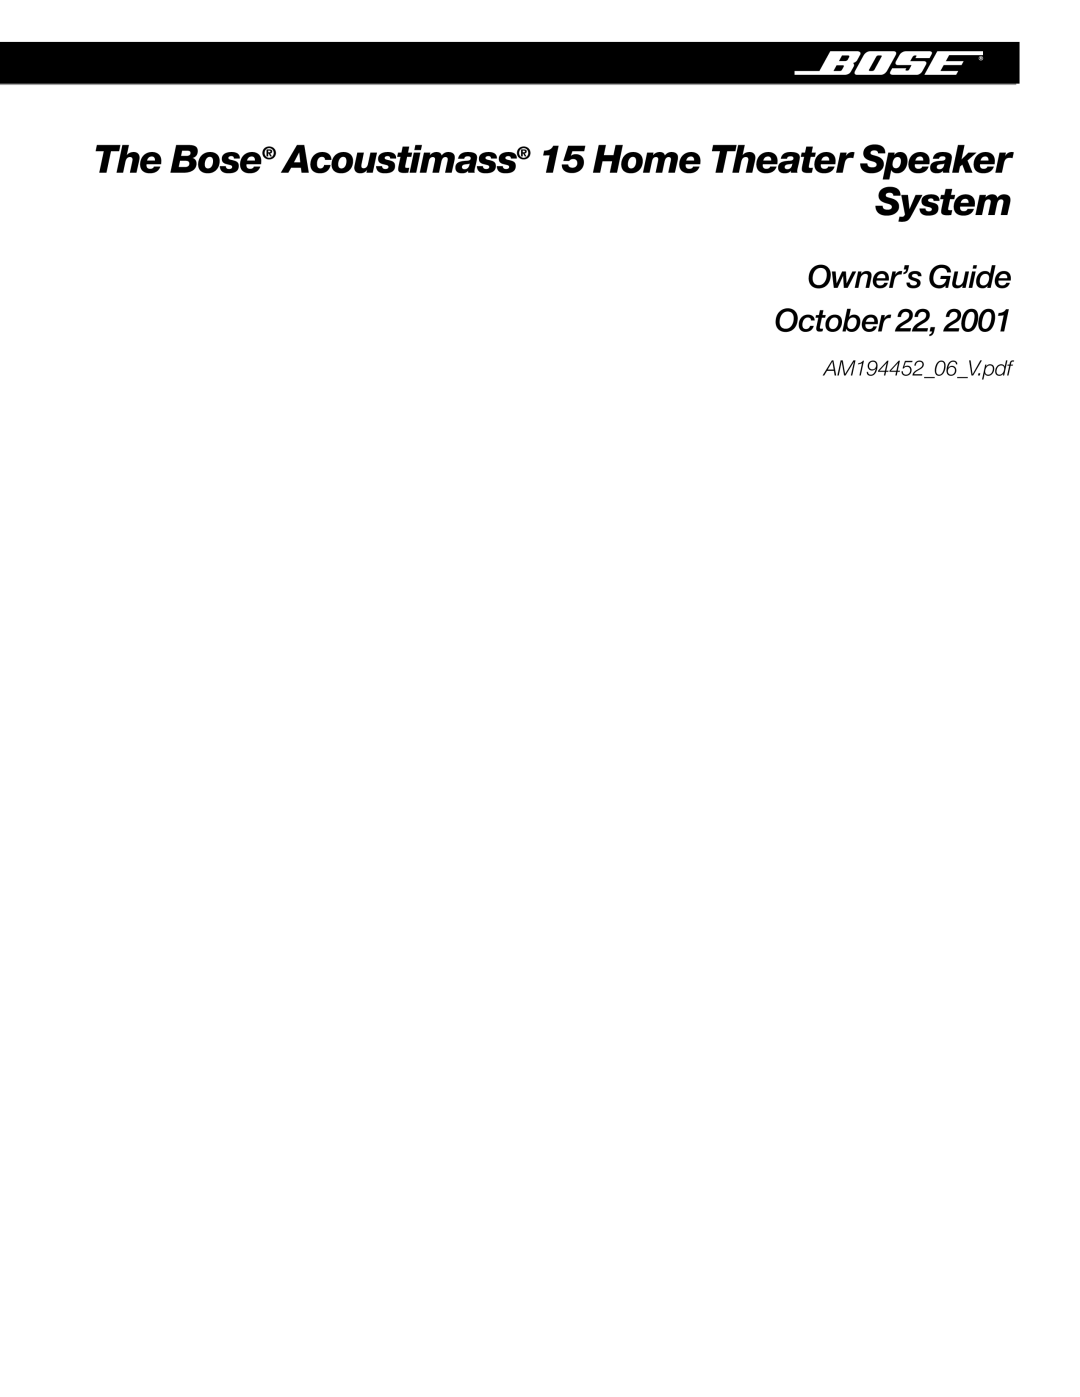 Bose Acoustimass manual Owner’s Guide October 